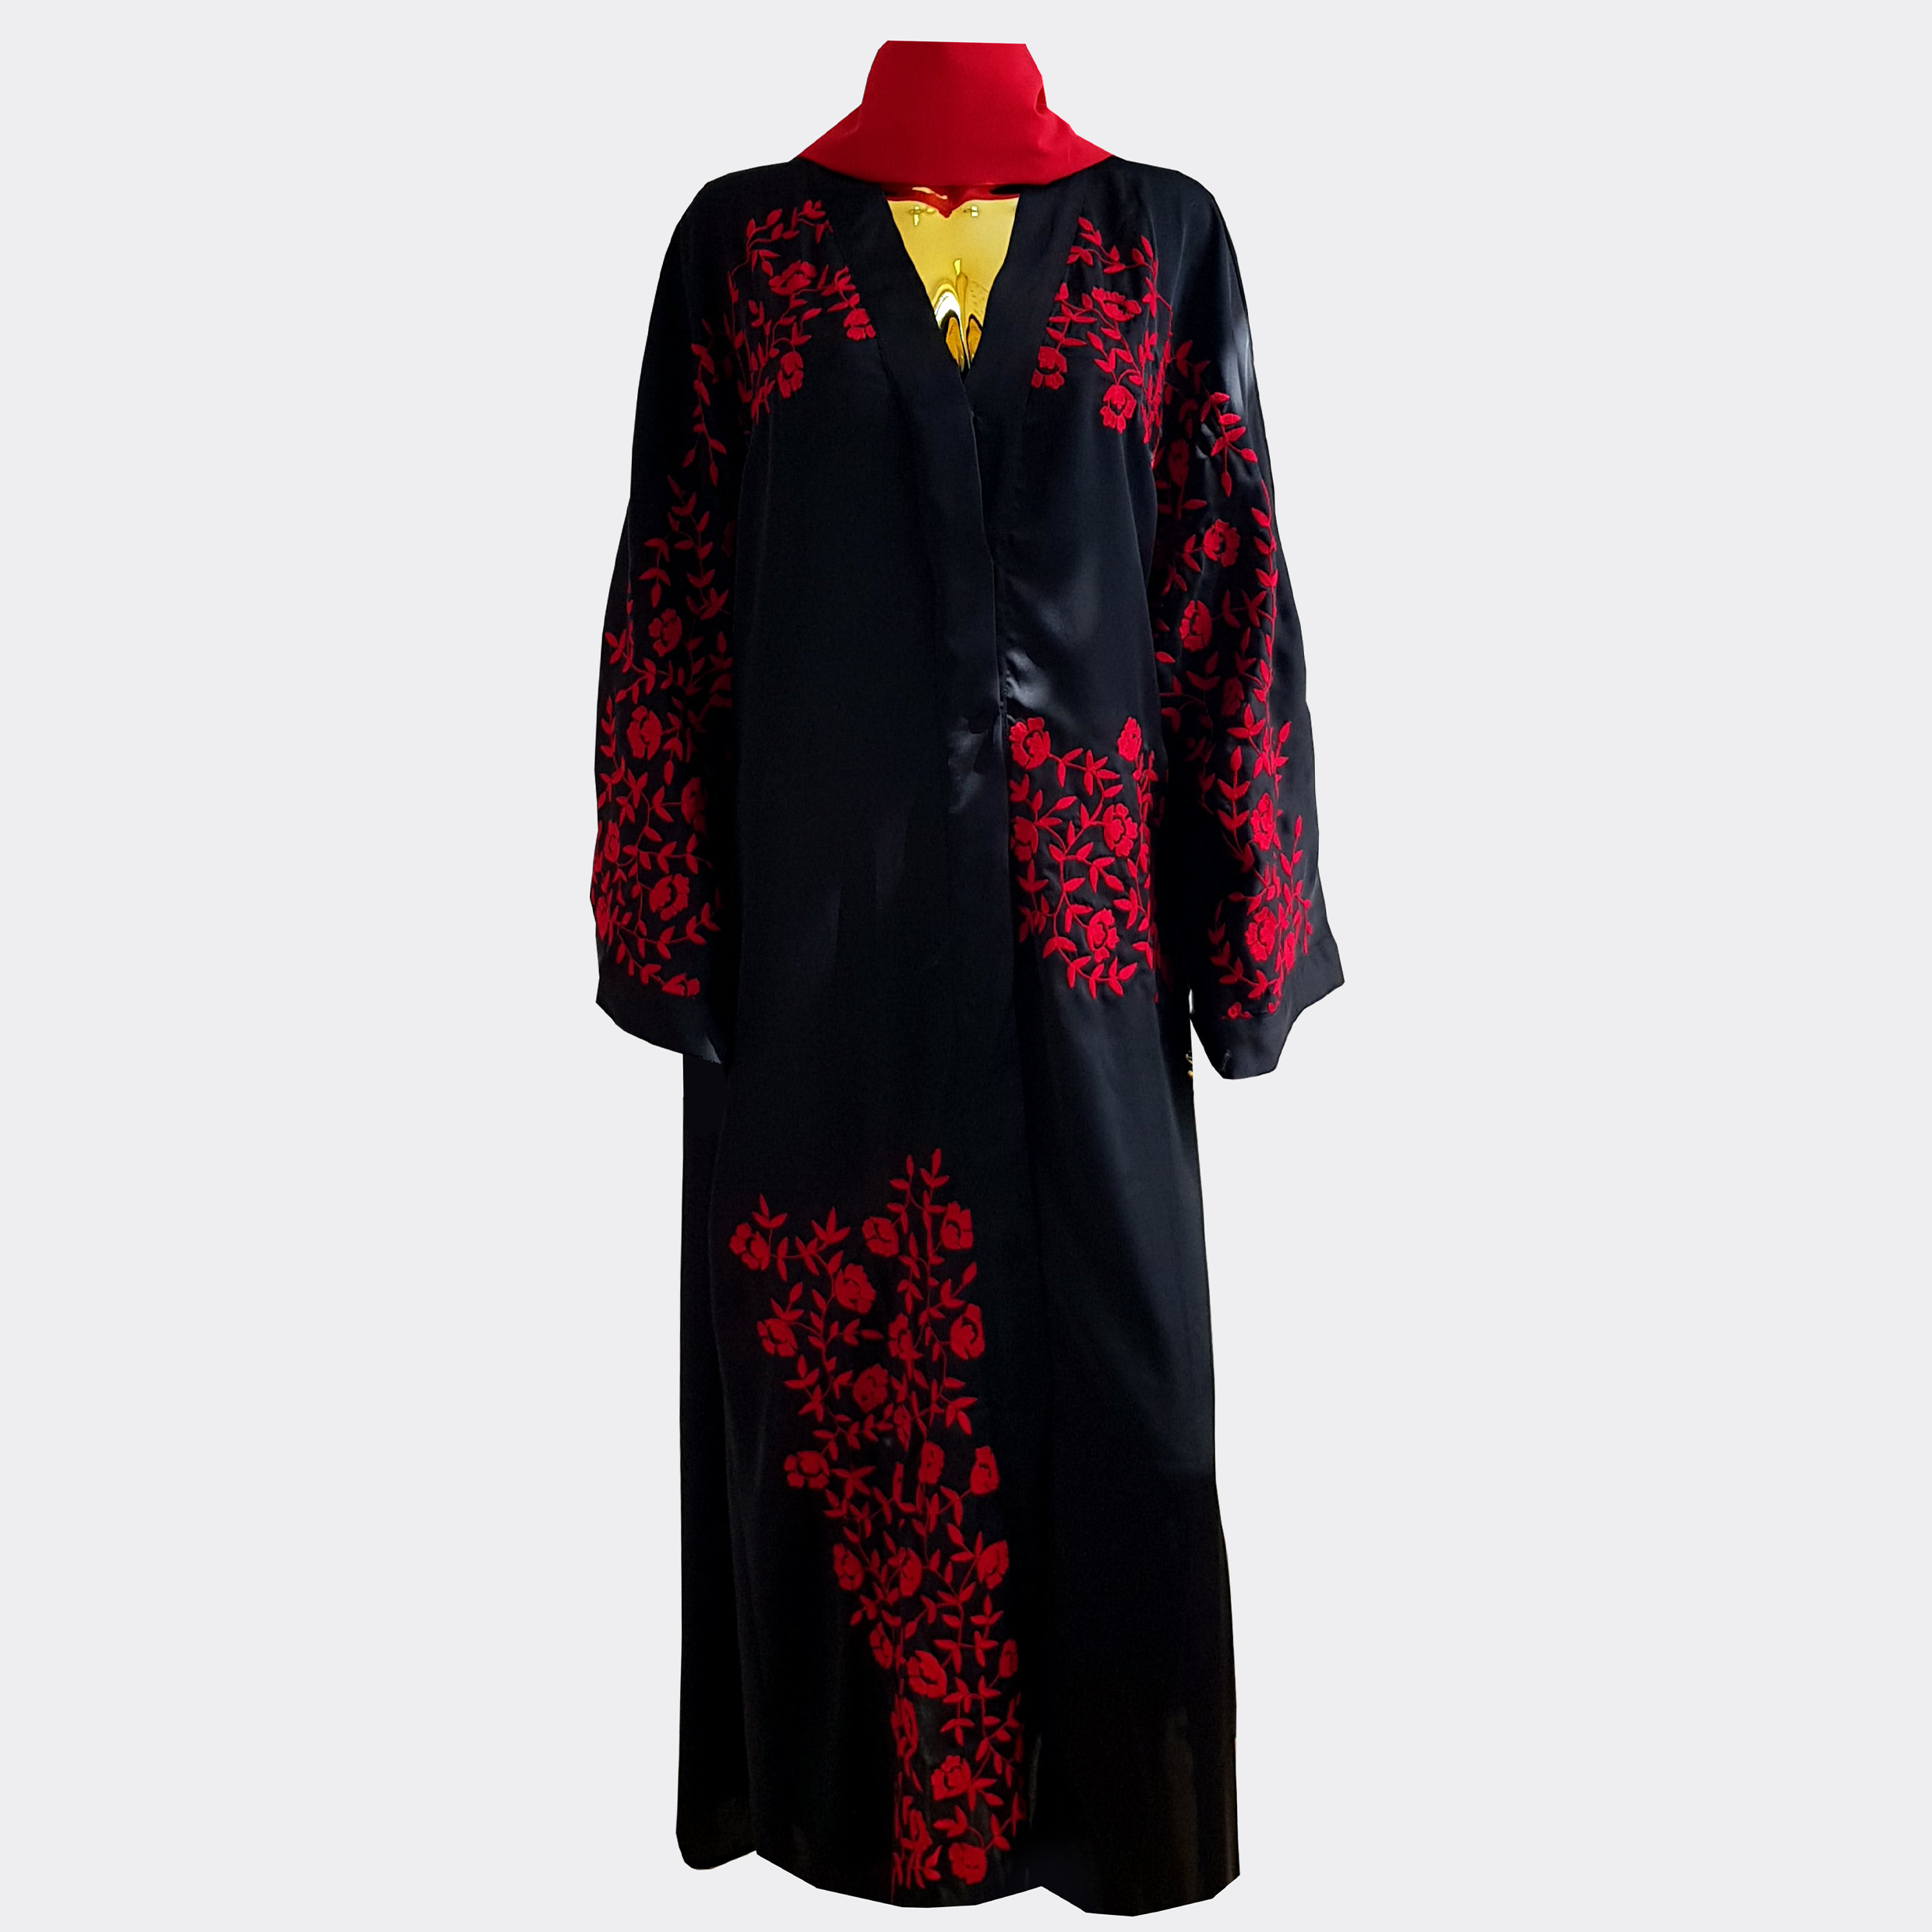 Sleek Black Abaya with Red Floral Accents